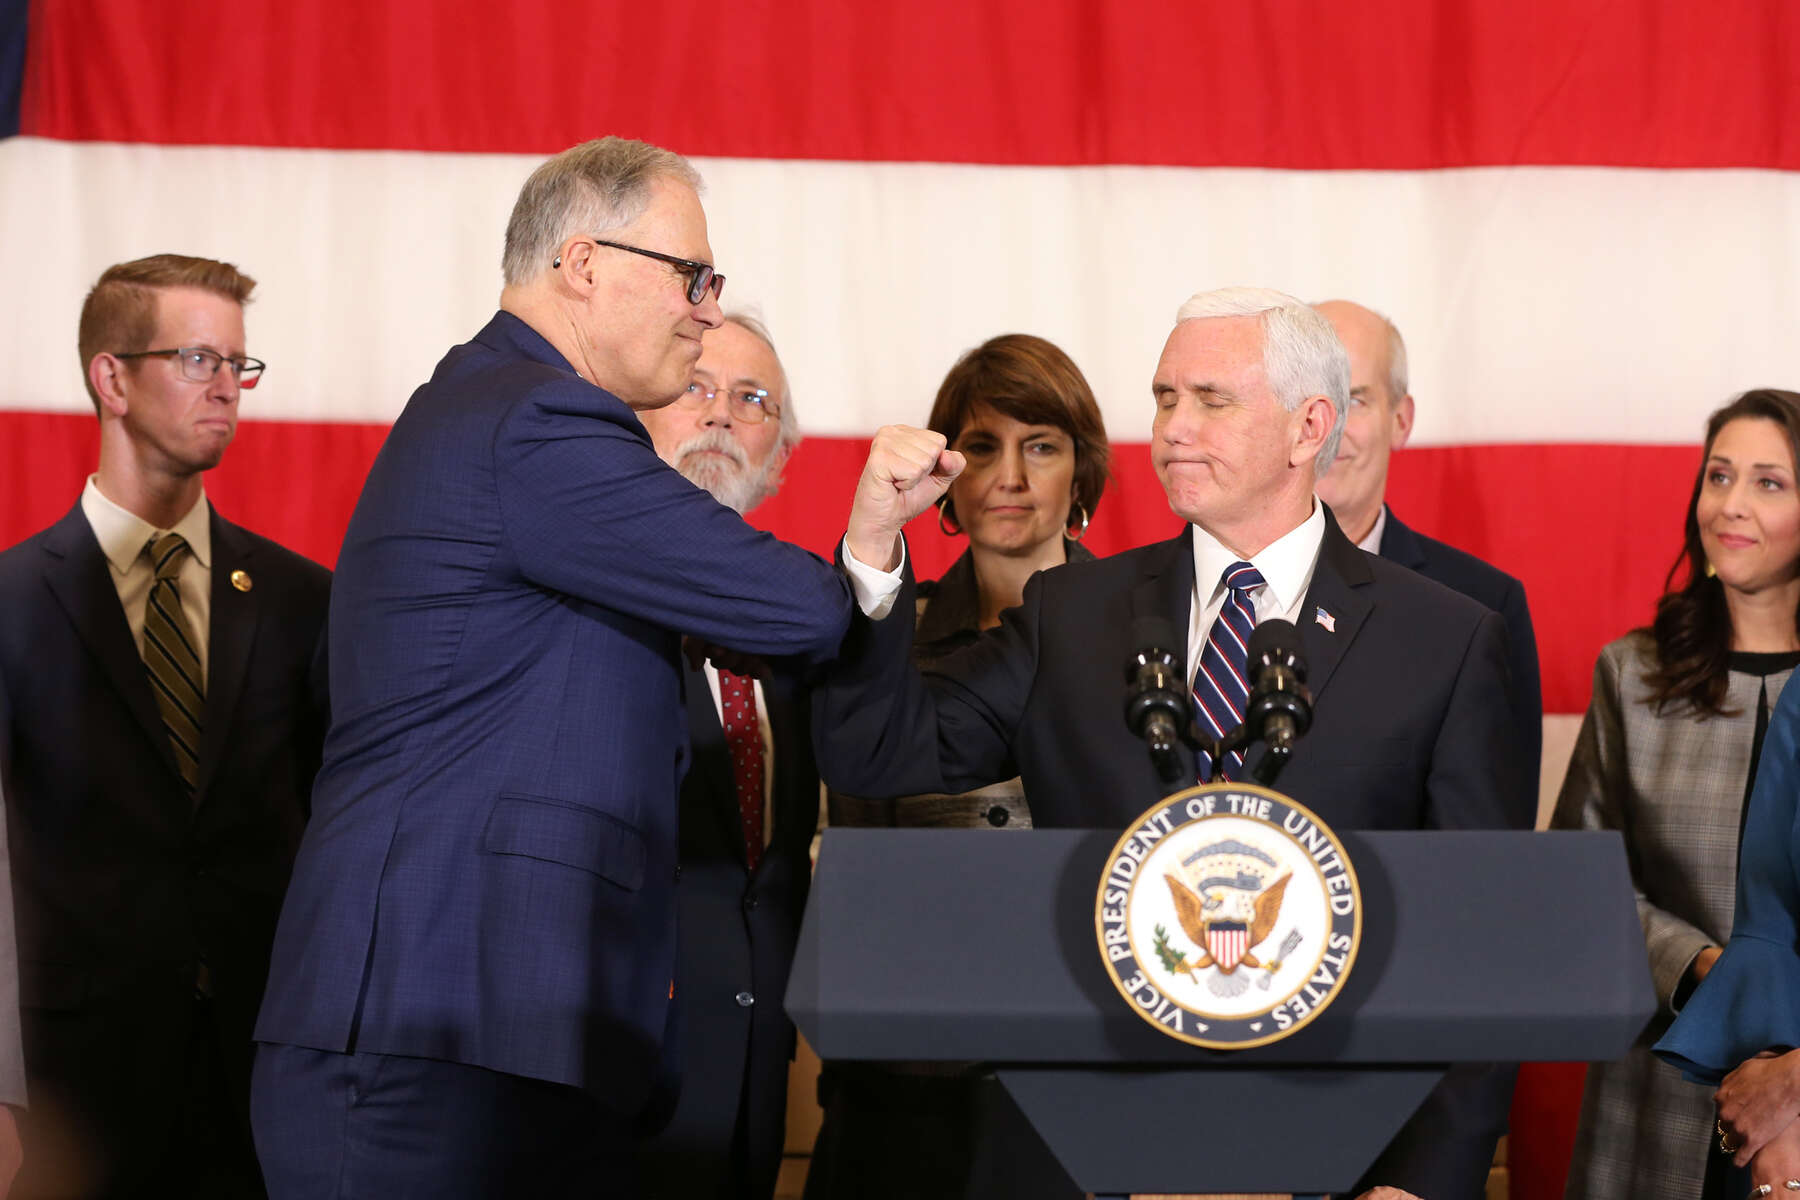 JOINT BASE LEWIS MCCHORD, WA - MARCH 05: Vice President Mike Pence visits Washington on Thursday afternoon to meet with Gov. Jay Inslee on March 5, 2020 in Joint Base Lewis McChord, Washington. They are joined by members of Washington state's congressional delegation, federal, state and local officials. (Photo by Karen Ducey/Getty Images)